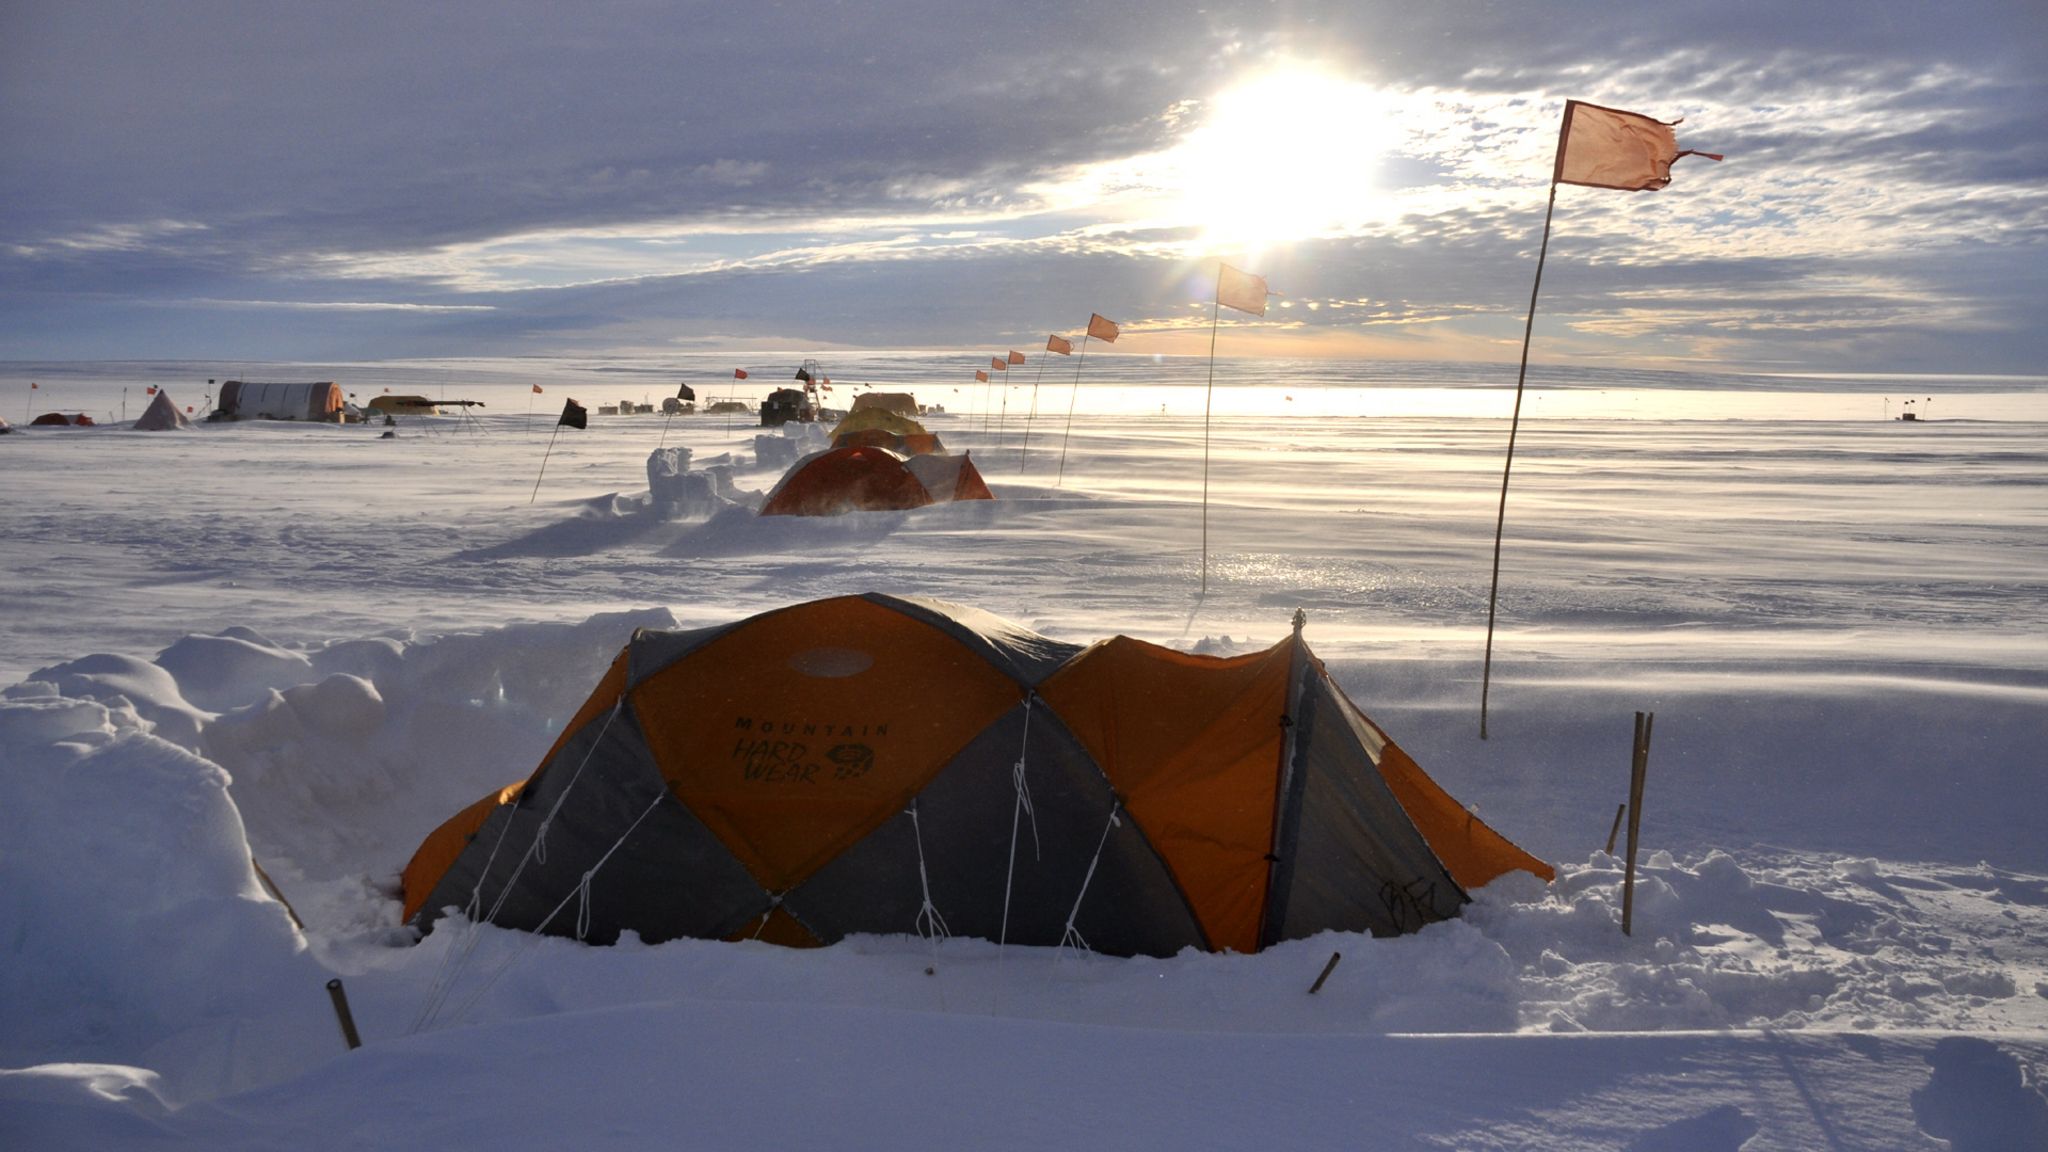 Extreme camping in Antarctica, tents in the snow